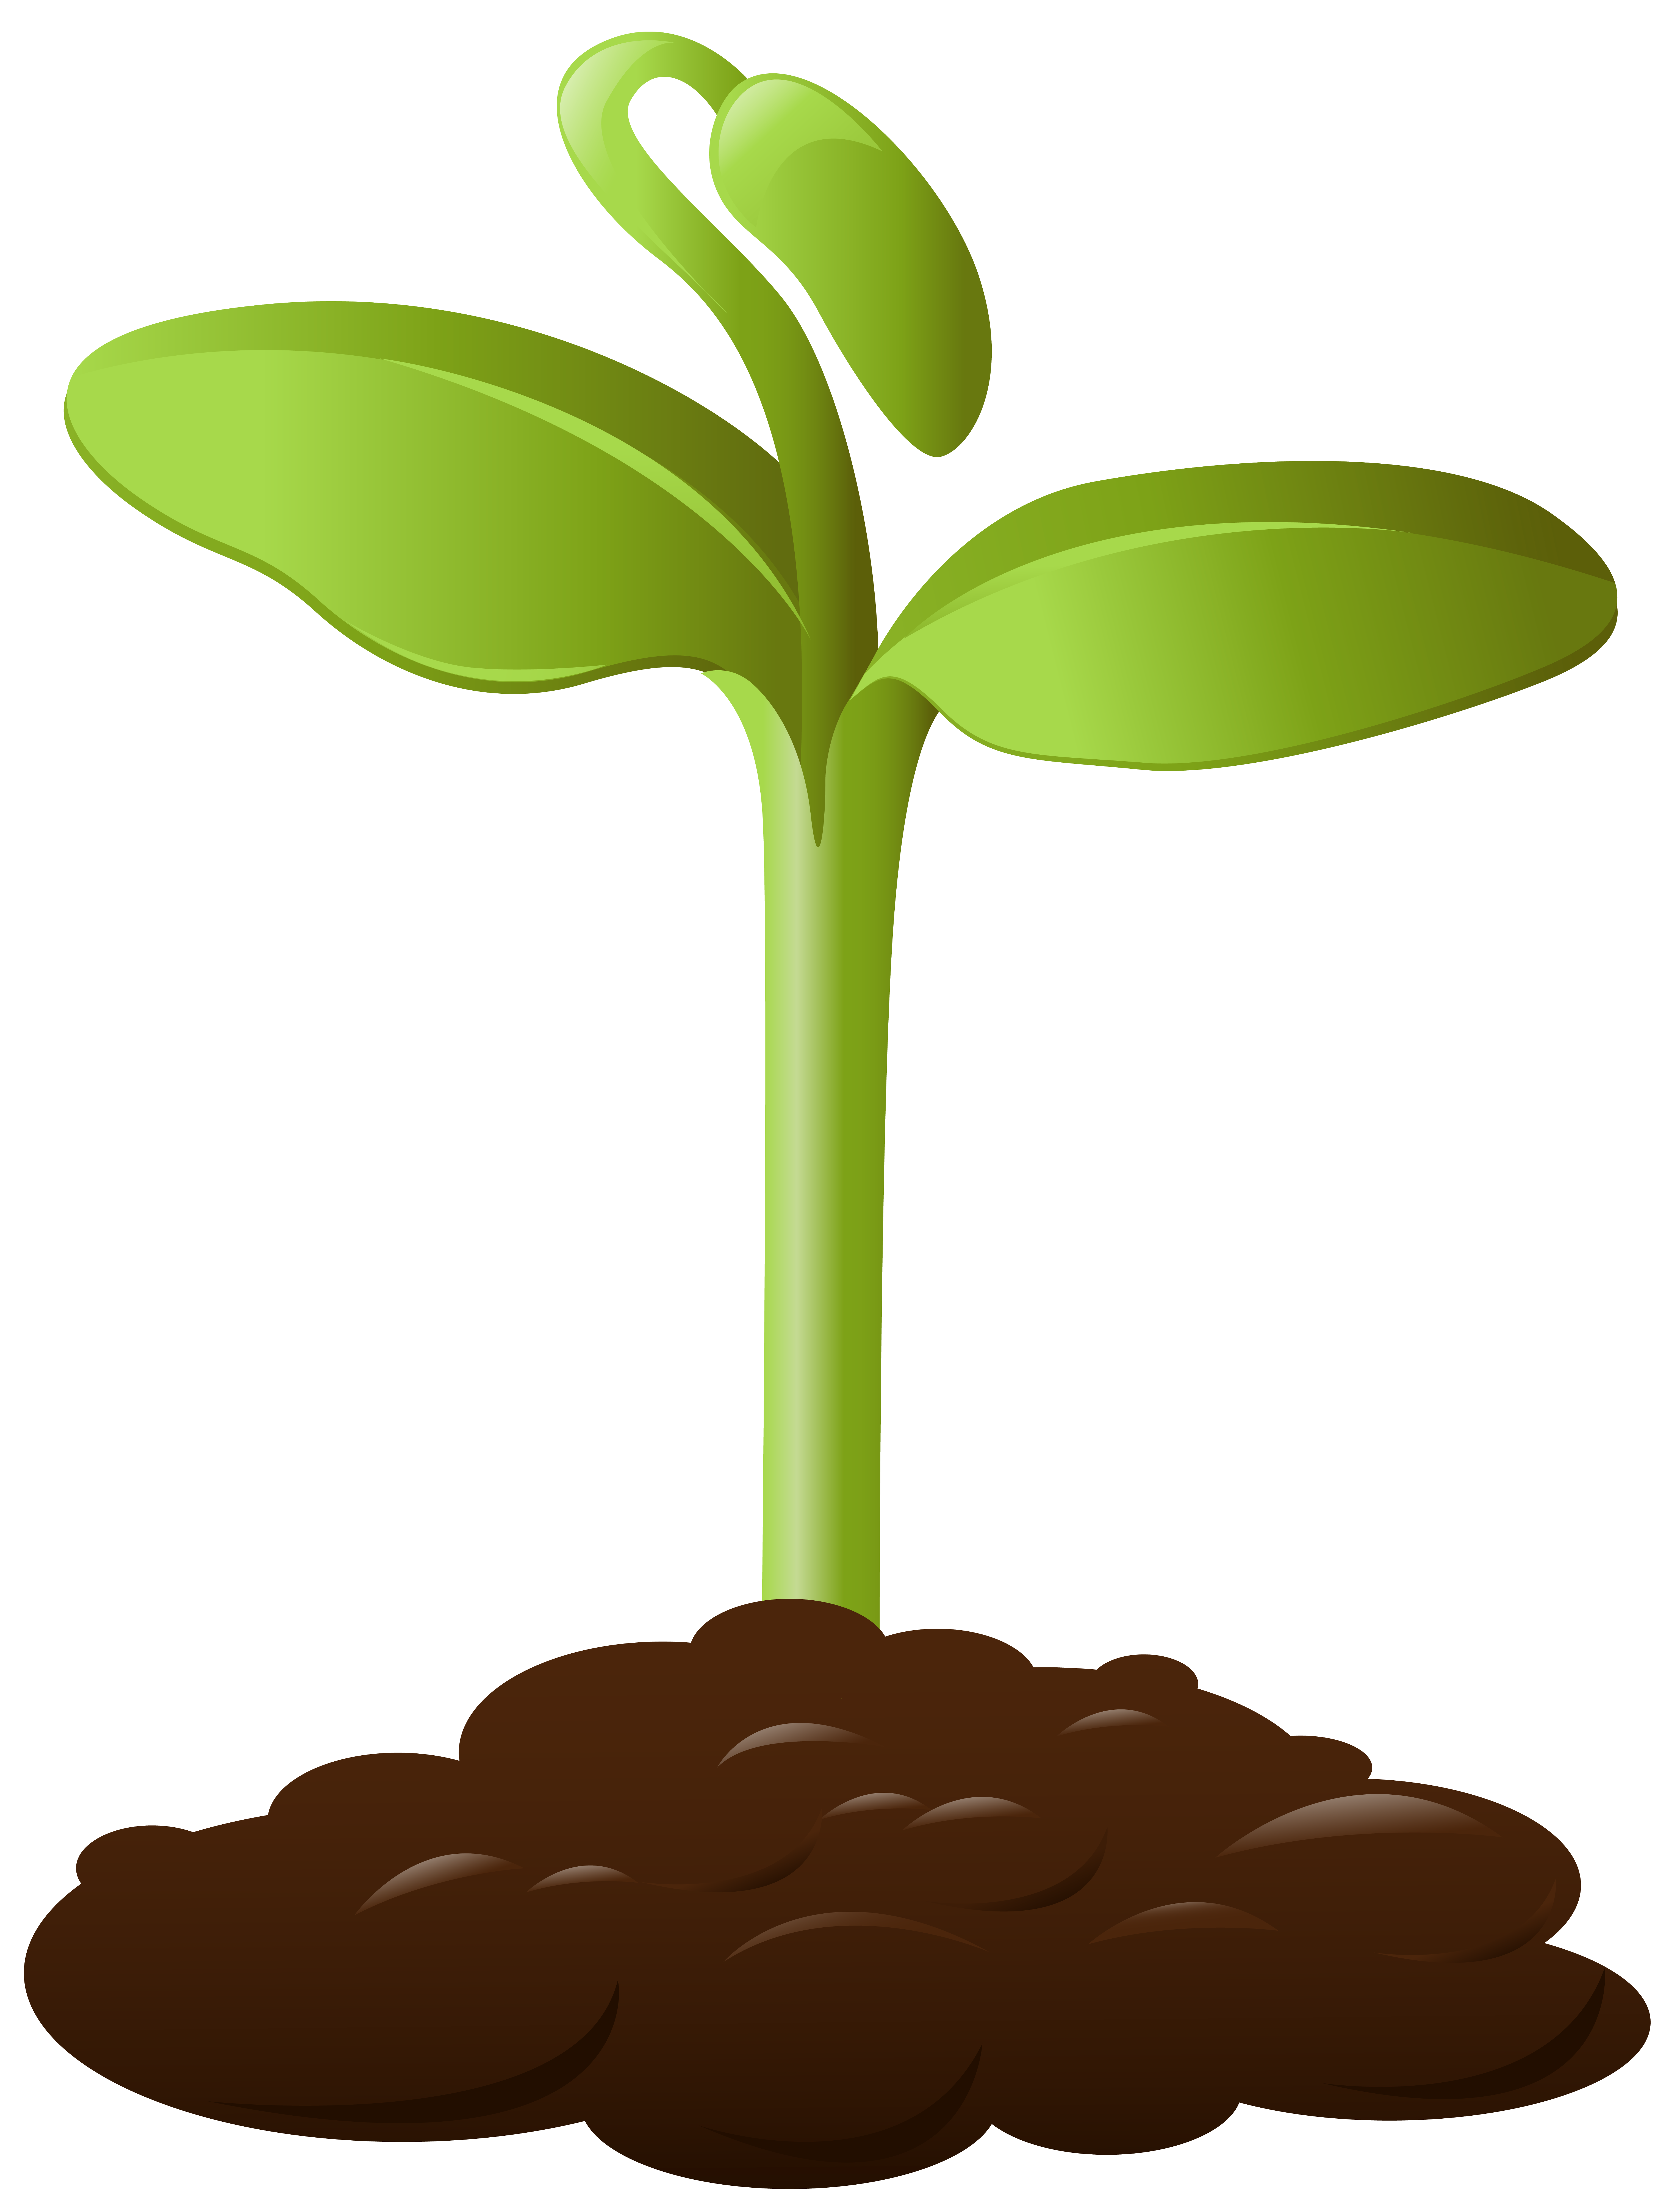 Plant clipart small.